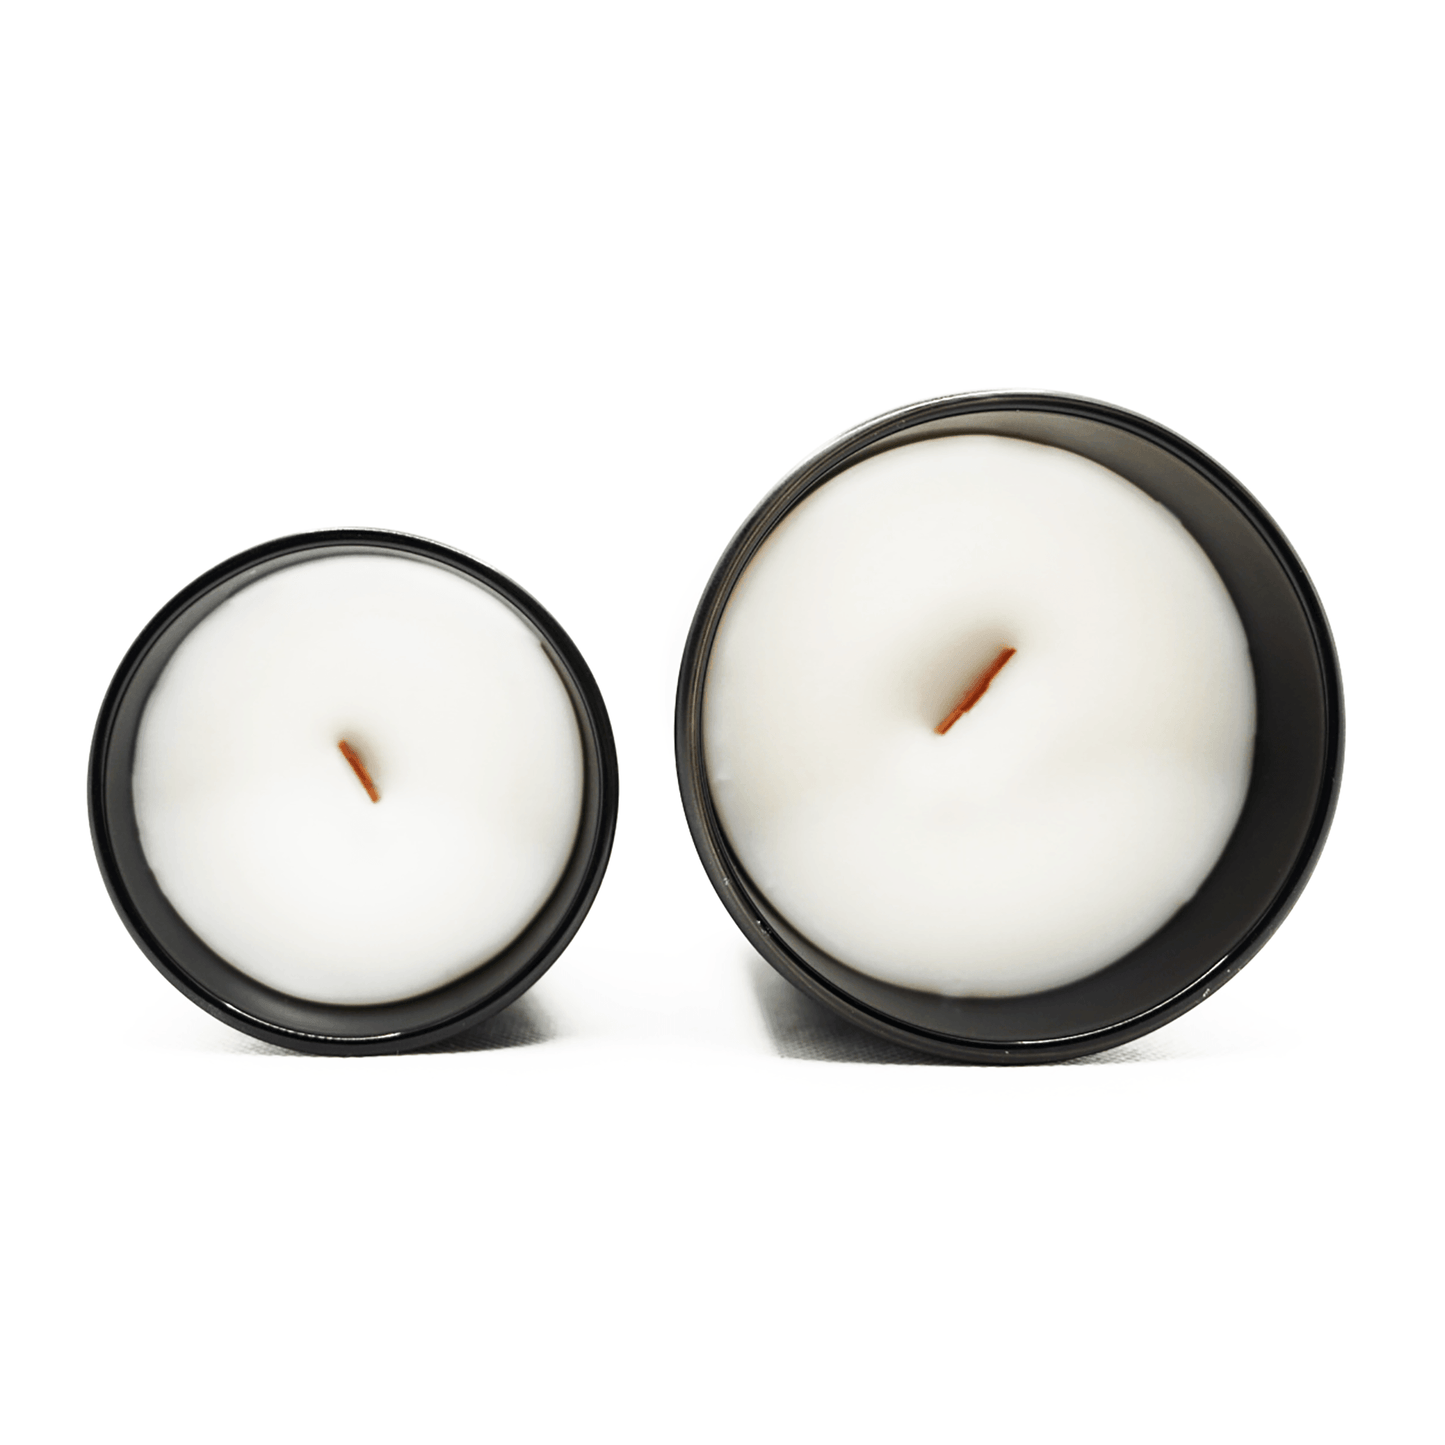 Will You Stuff Me? - Woodwick Candle - BADWAX